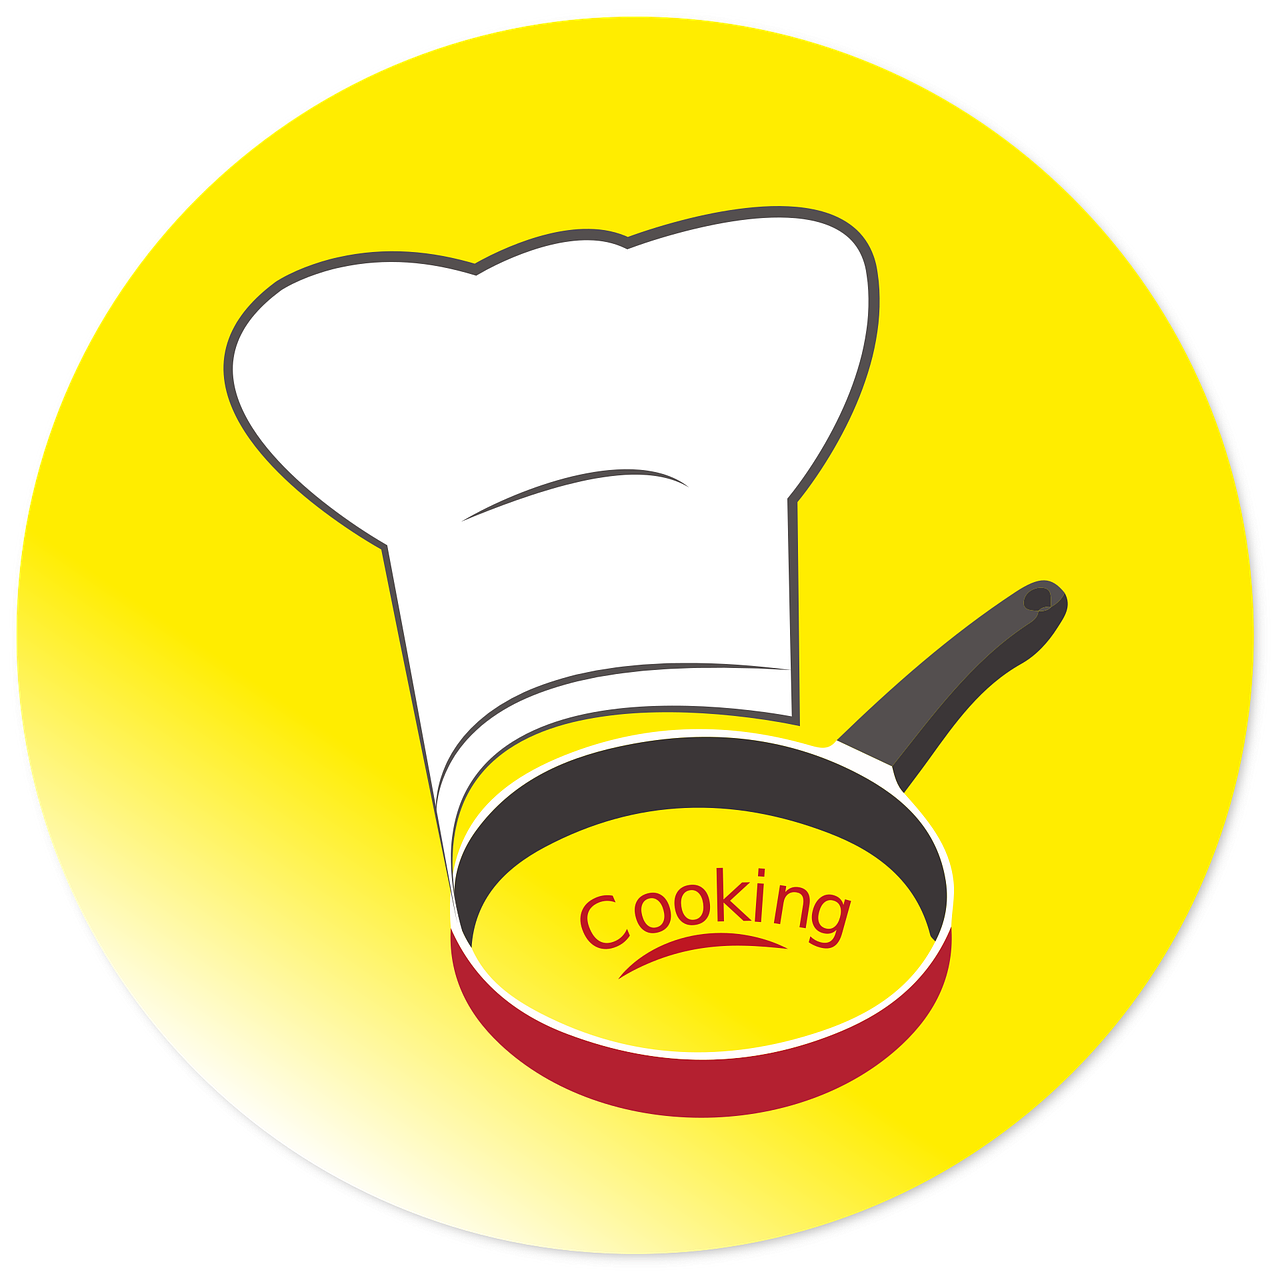 Cooking PNG HD Image